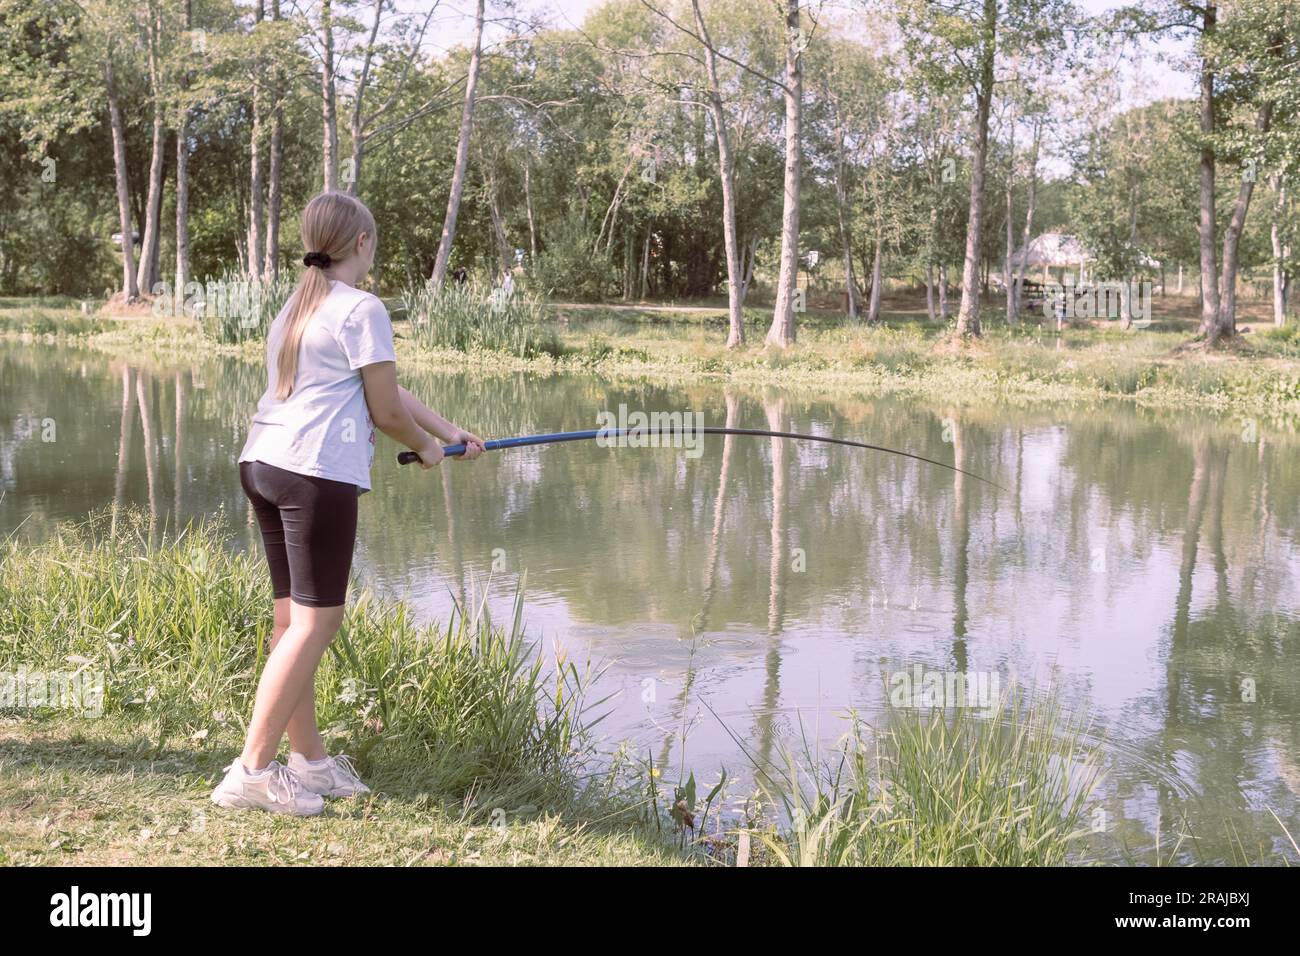 https://c8.alamy.com/comp/2RAJBXJ/a-teenager-girl-of-european-appearance-with-blond-hair-tied-in-a-ponytail-stands-fishing-at-a-stake-holds-a-fishing-rod-in-her-hands-dressed-in-bla-2RAJBXJ.jpg